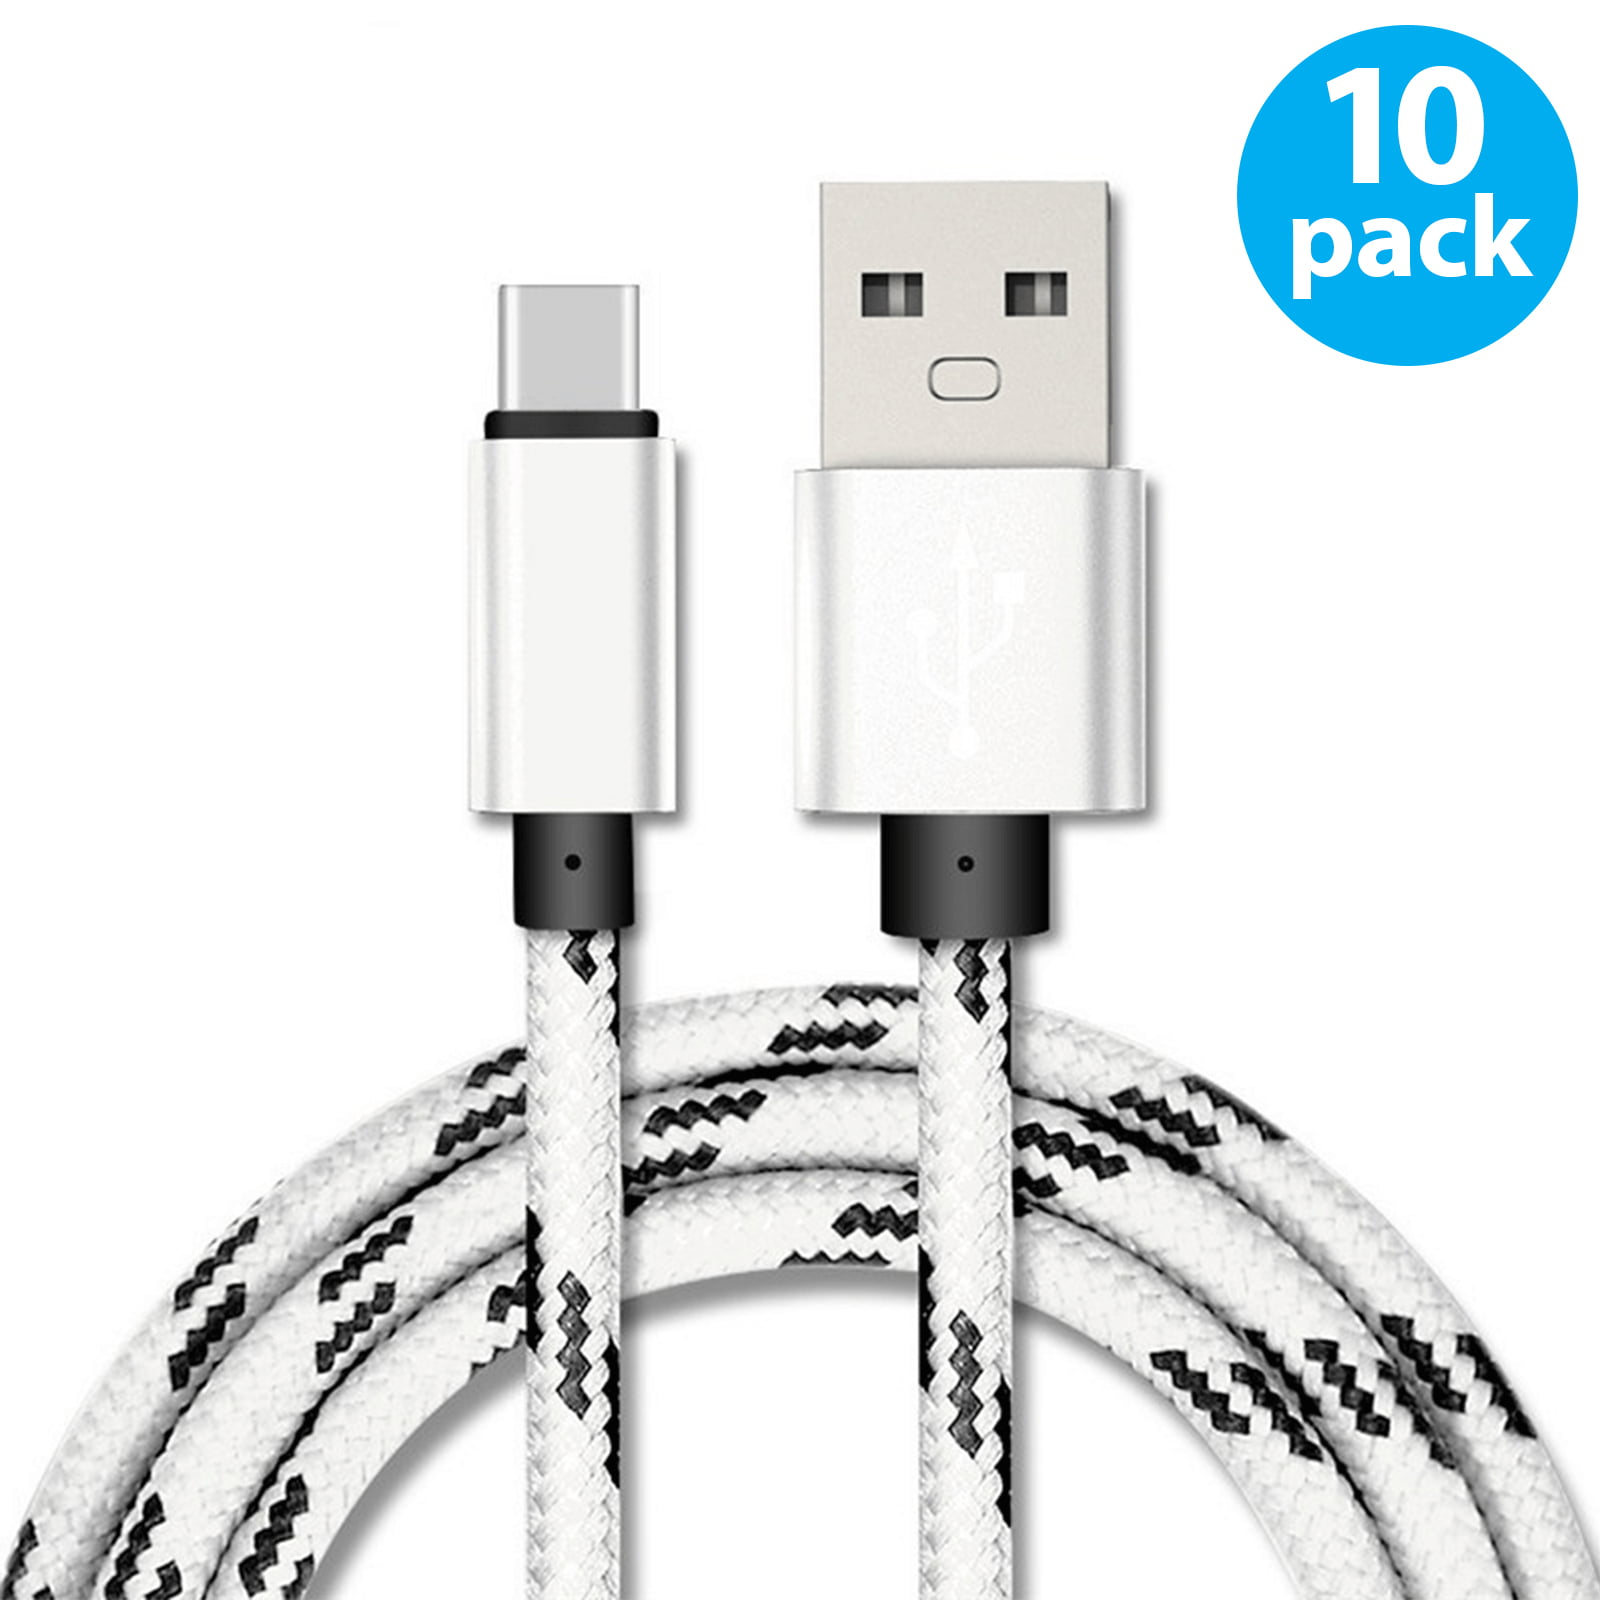 2-Pack 10ft USB Type C Cable 3.1A Fast Charging ,Sweguard USB-A to USB-C Charge Braided Cord Compatible with Samsung Galaxy S20 S10 S9 S8 Plus A51 A11,Note 10 9 8,PS5 Controller,USB C Charger-Black 